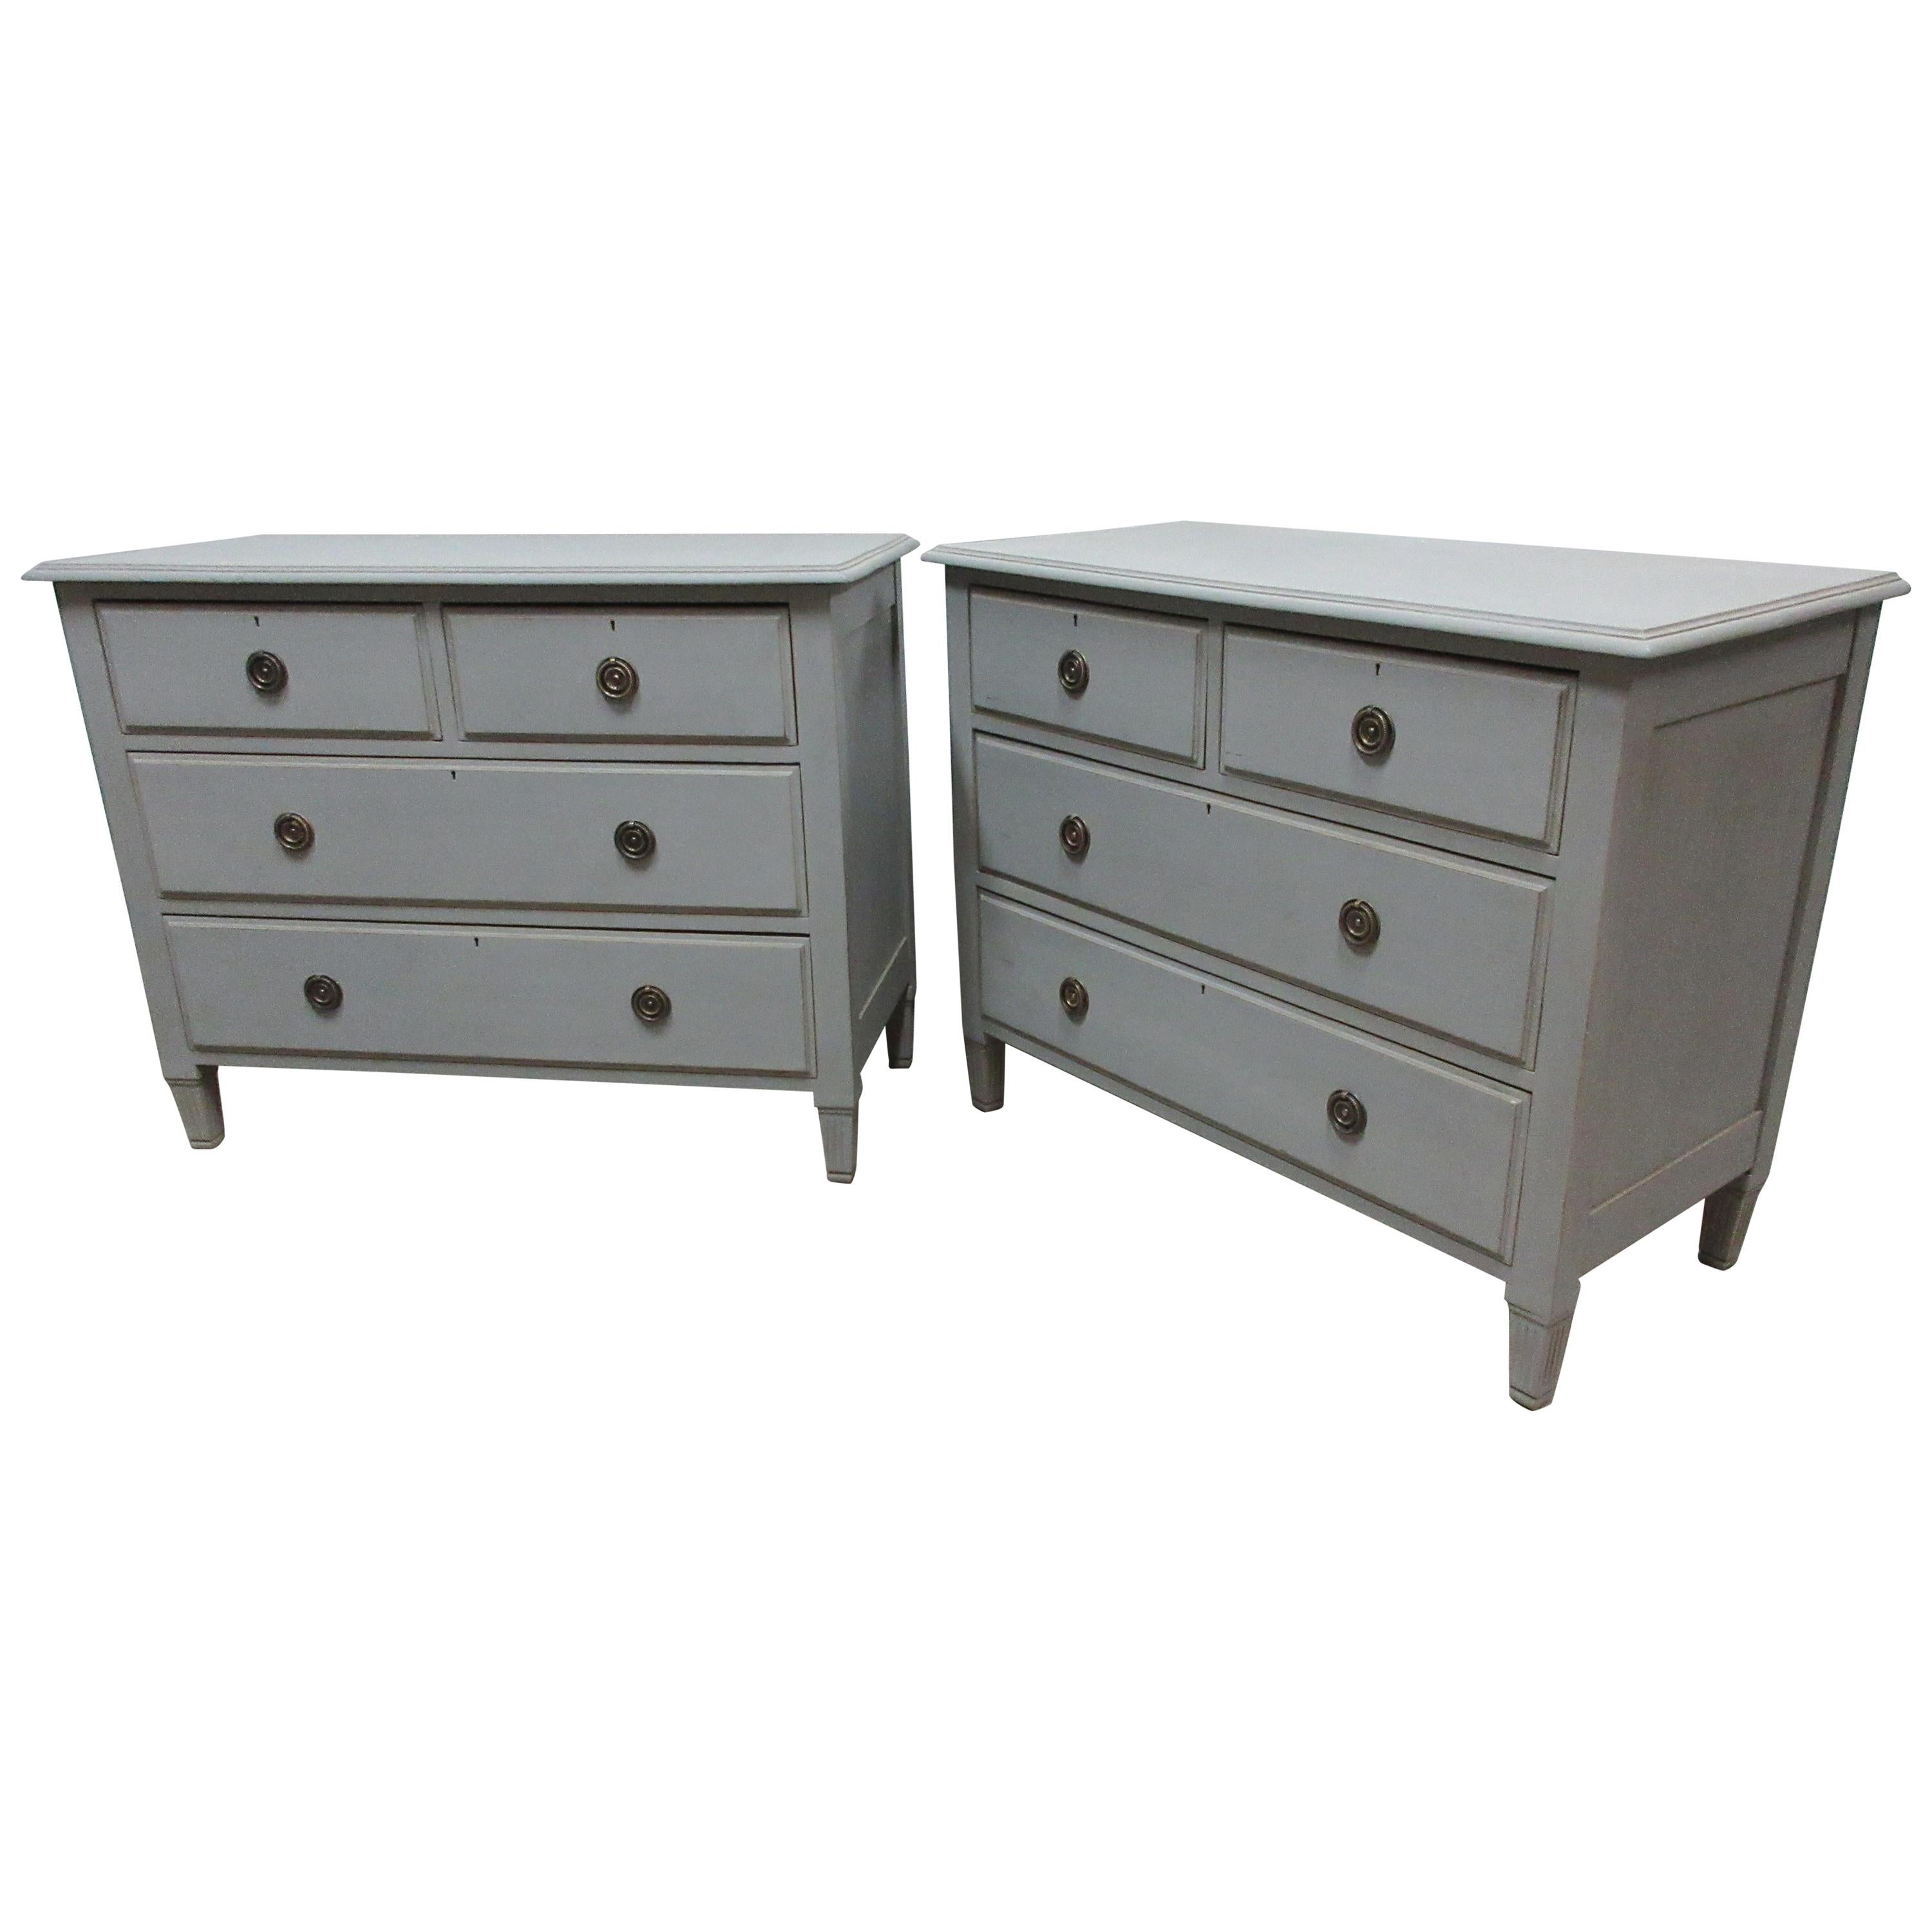 2 Gustavian Chest of Drawers